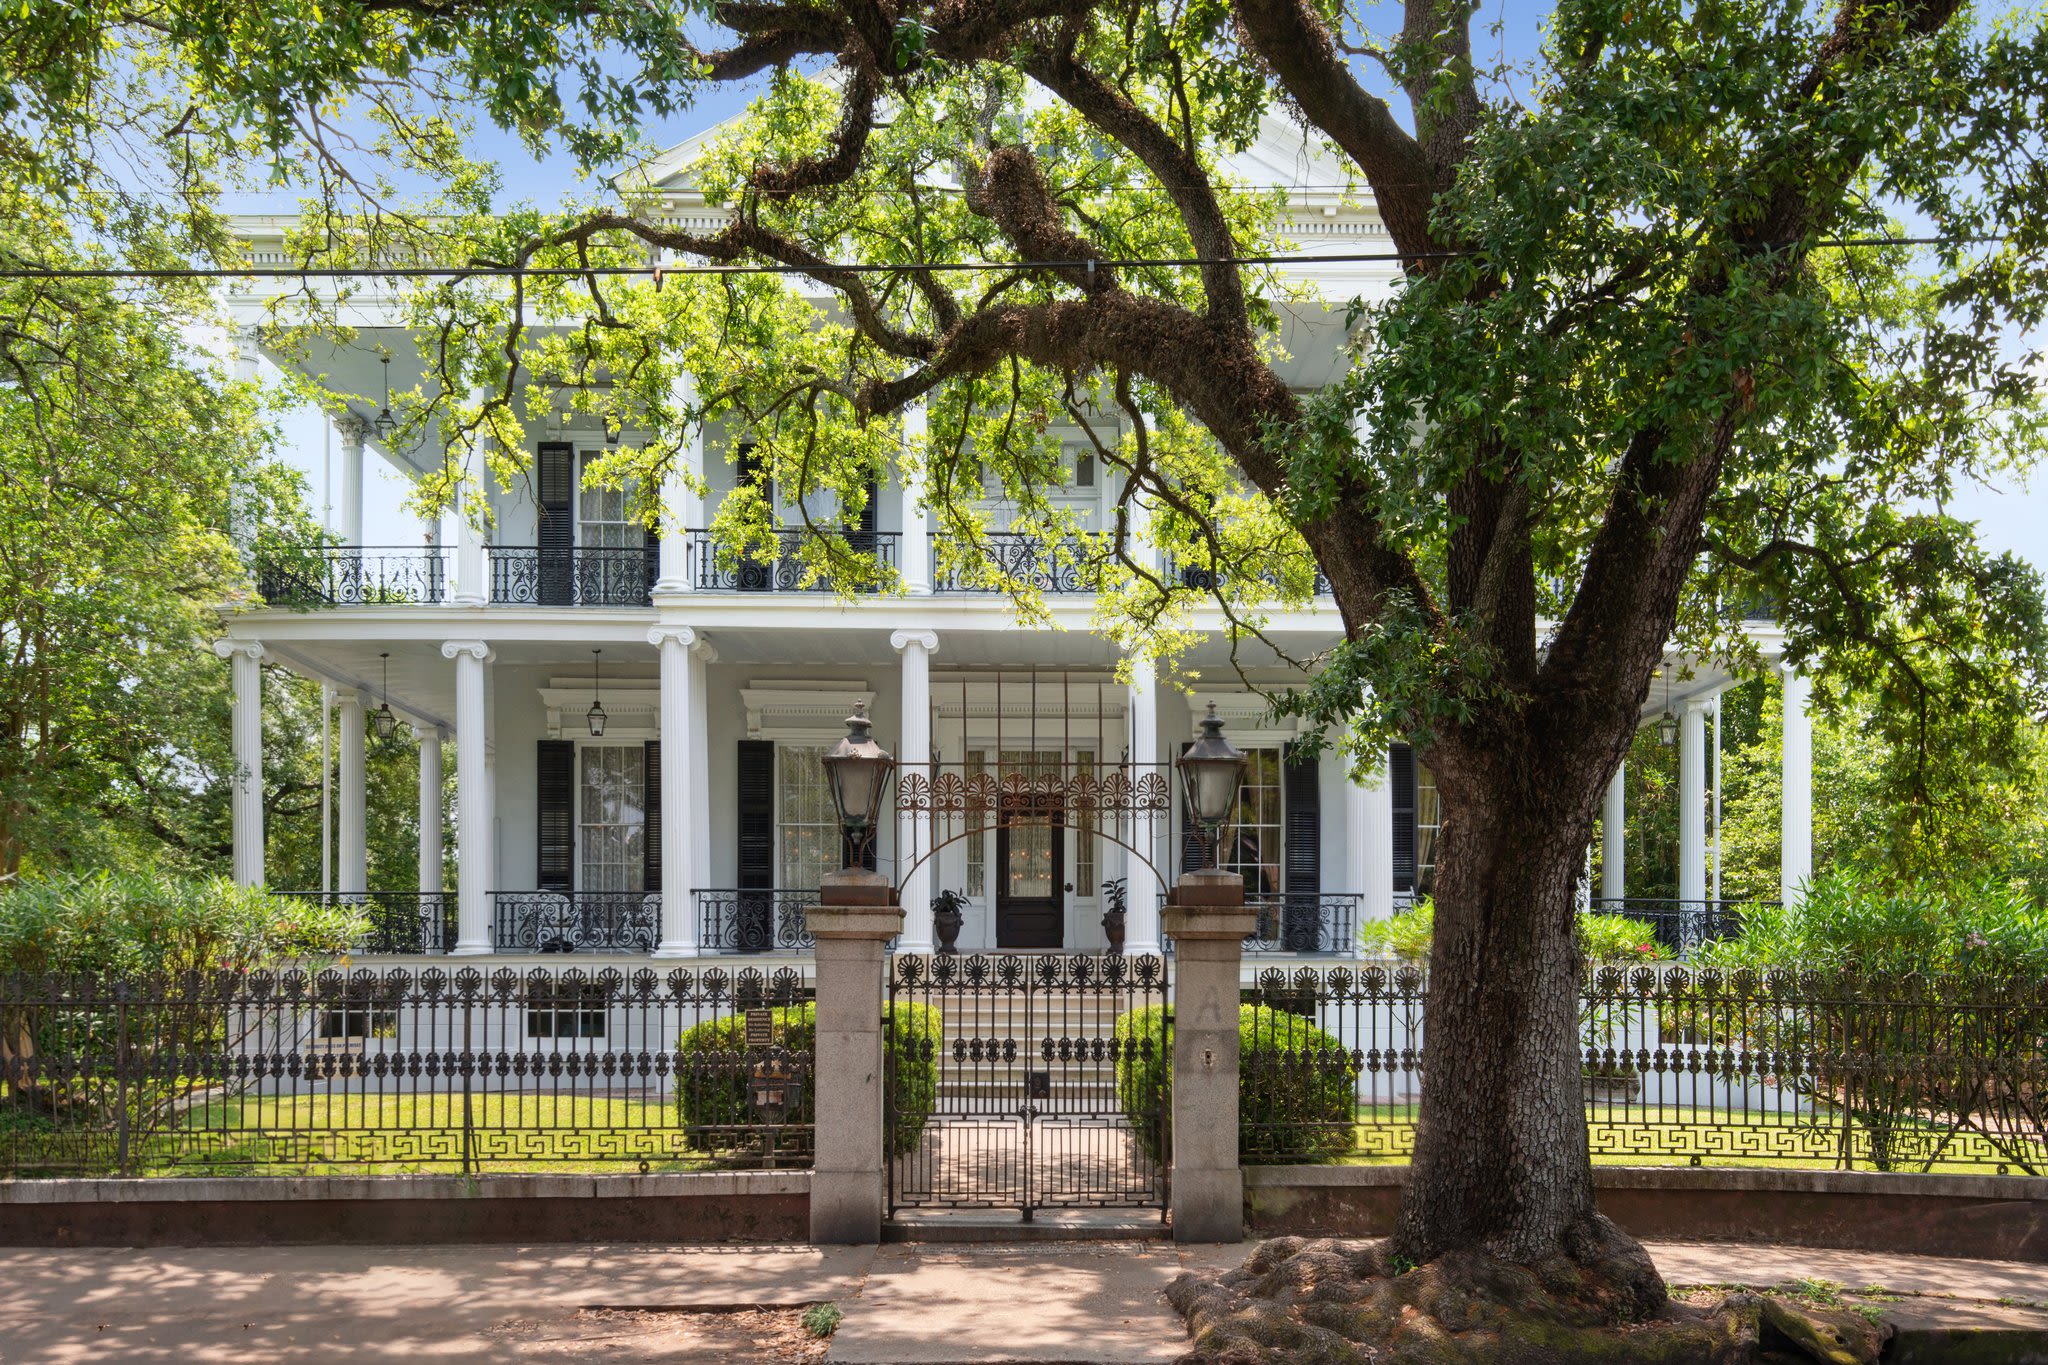 New Orleans 'American Horror Story' mansion put for sale at $4.5M